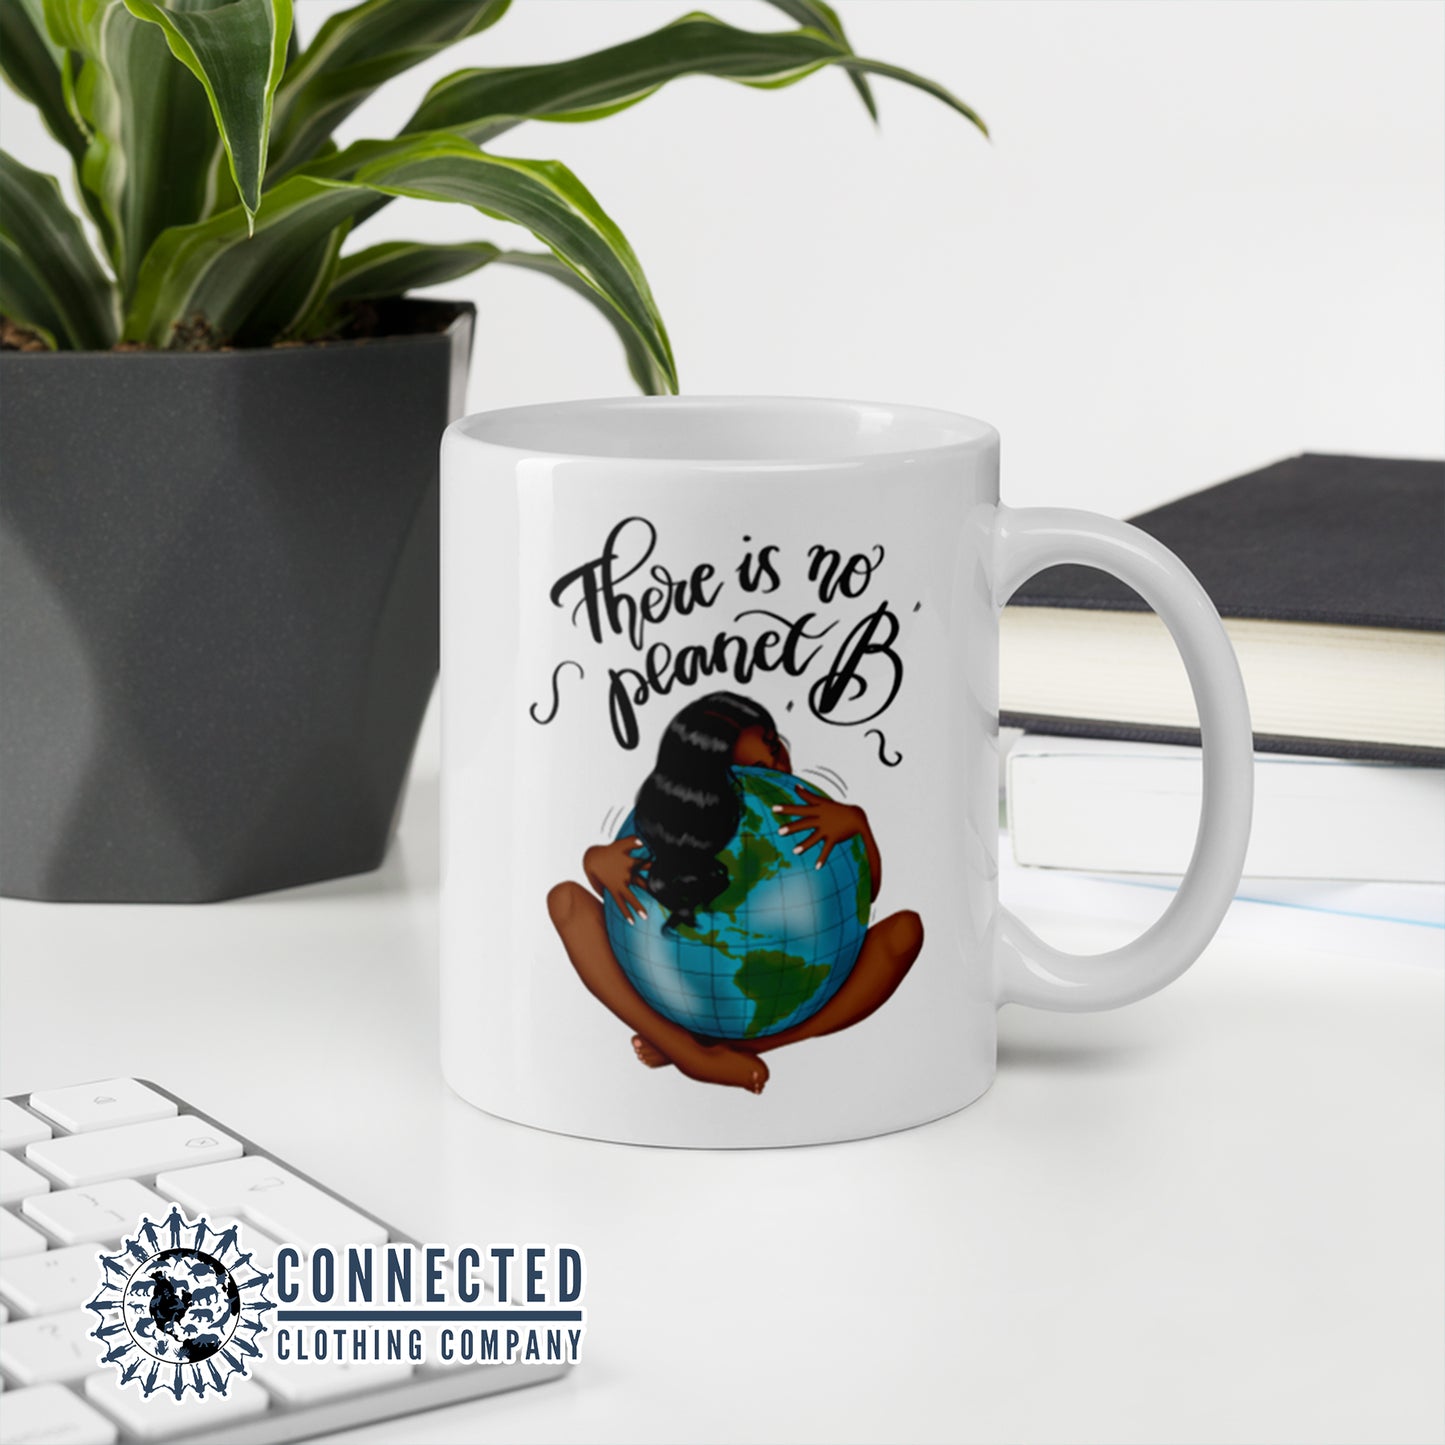 No Planet B Classic Mug 11oz - Connected Clothing Company - Ethically and Sustainably Made - 10% donated to Mission Blue ocean conservation